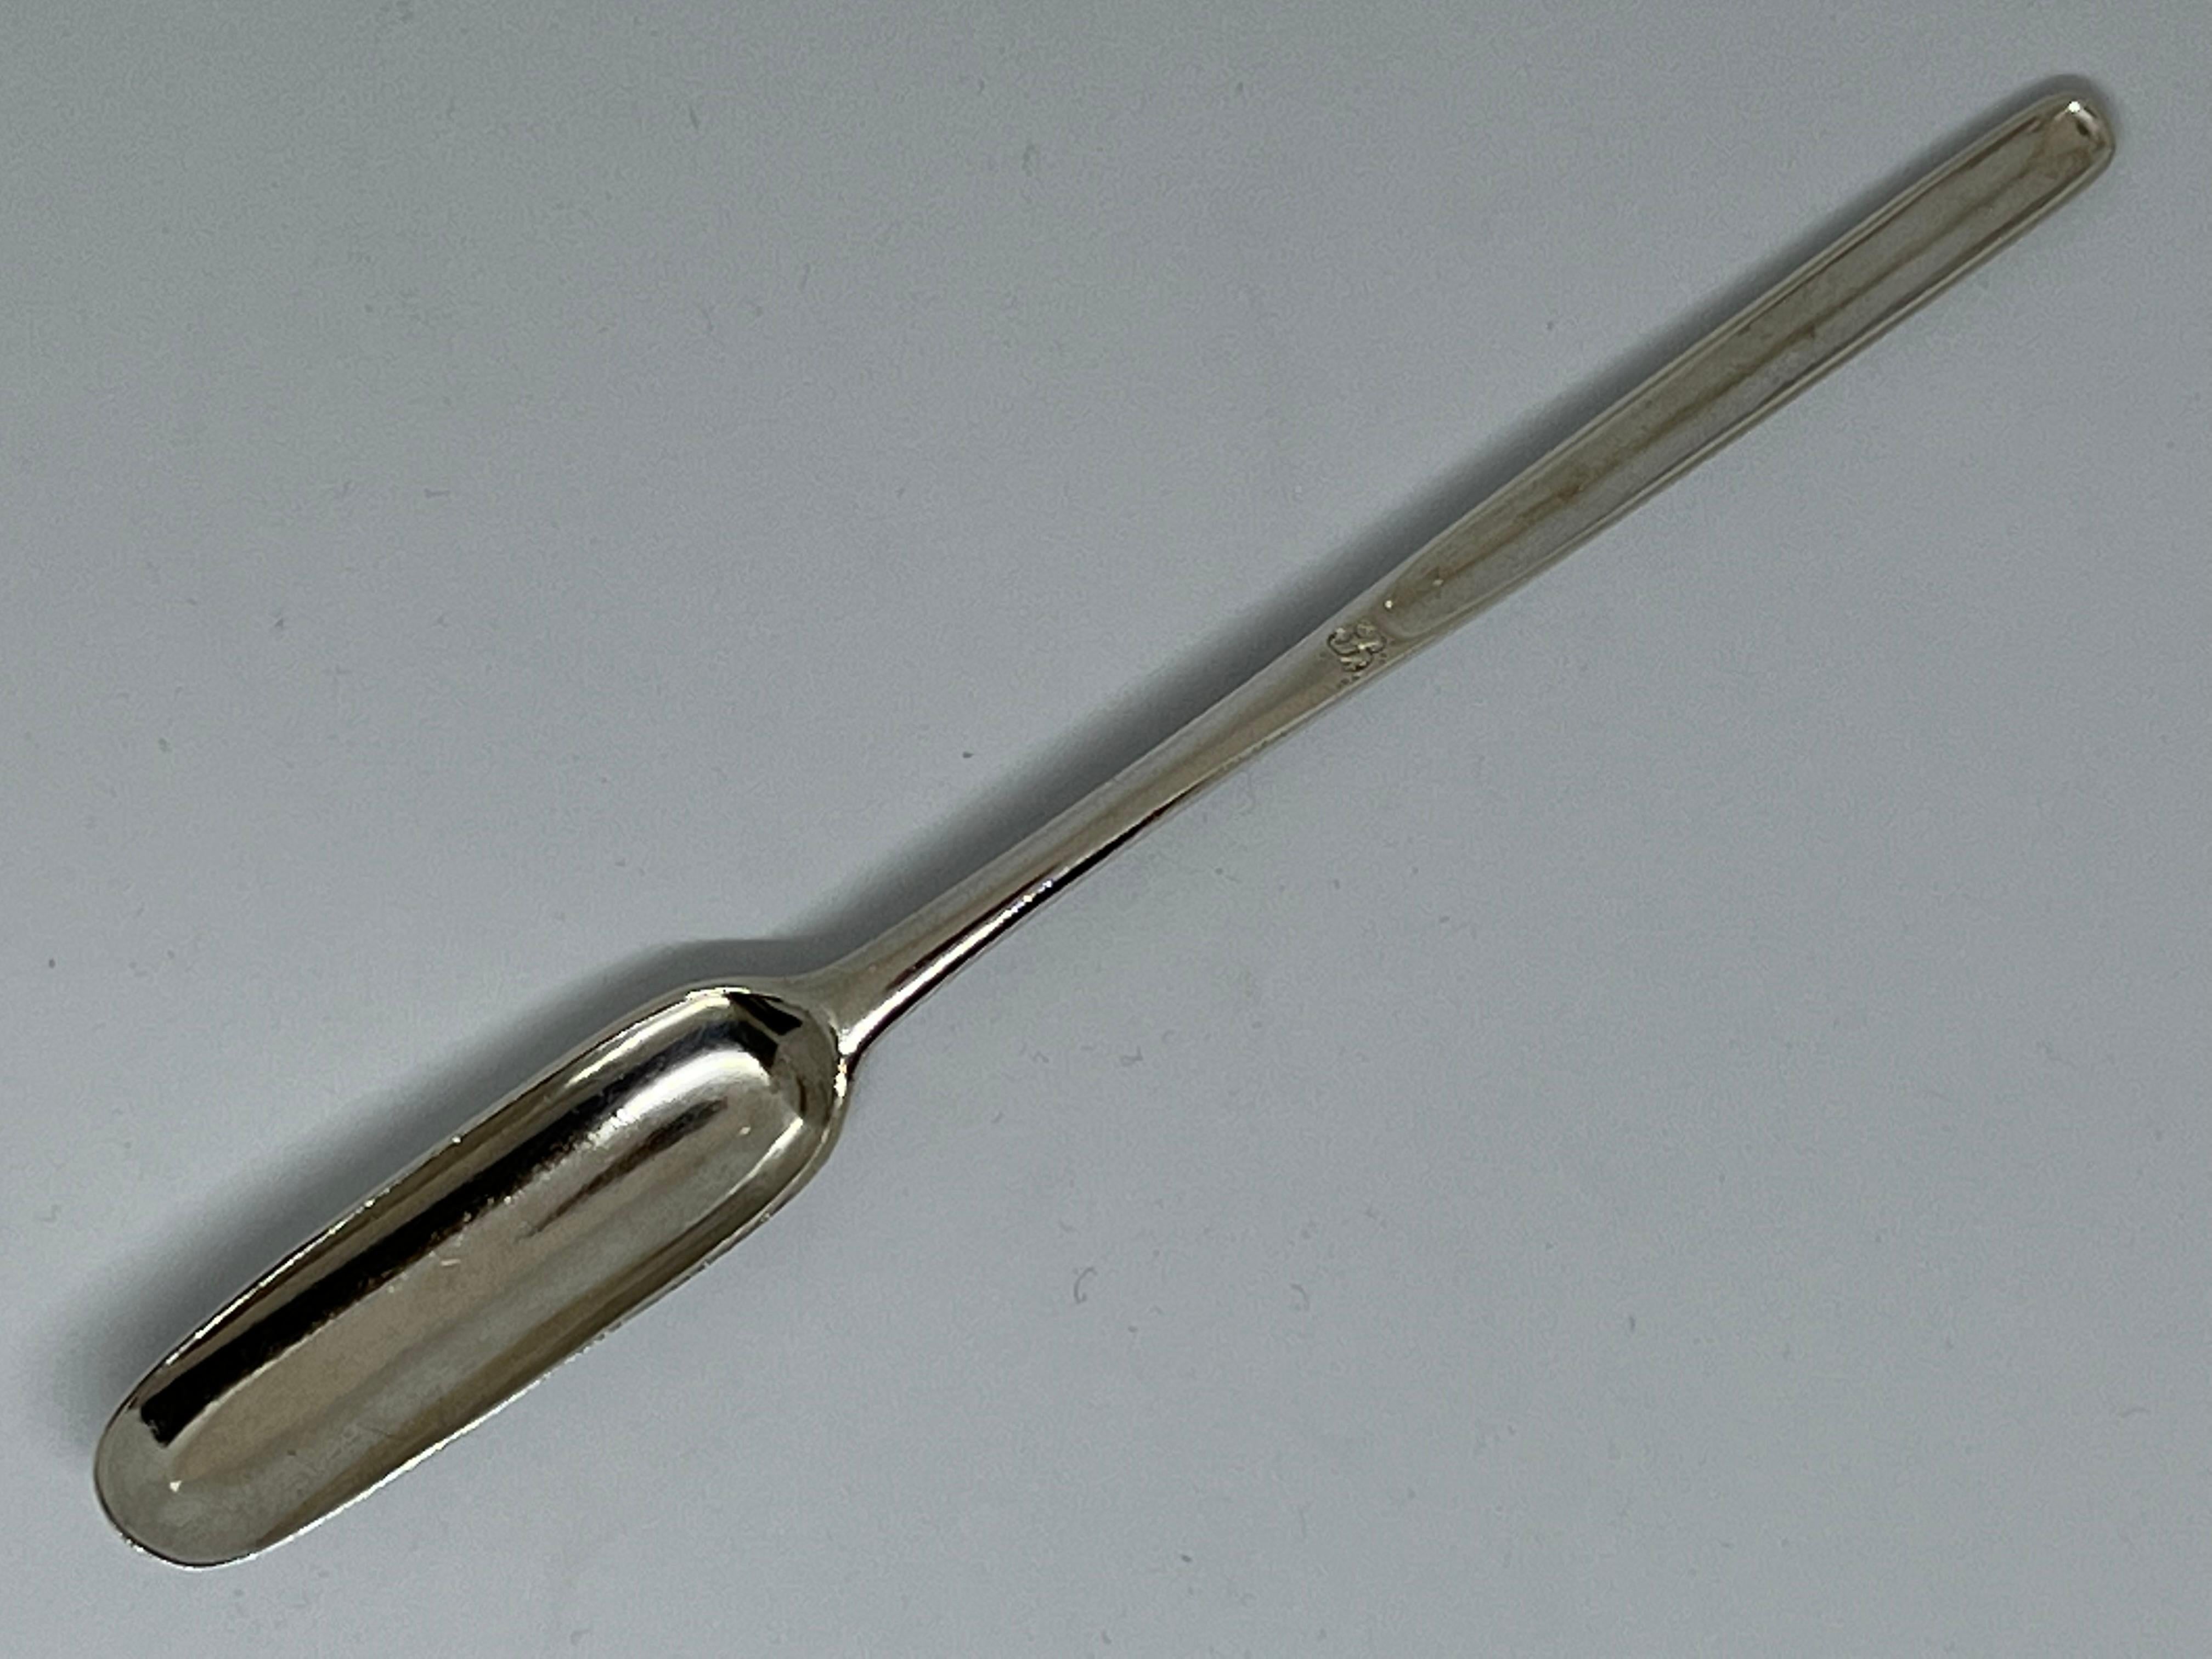 Queen Anne silver marrow scoop.

An early eighteenth-century Britannia Standard (0.958/1000) silver marrow scoop.

John Clifton. London, 1713.

Measures: Length: 20cm. 
Weight: 40 grams.

Condition: Very nice condition. In excess of 300